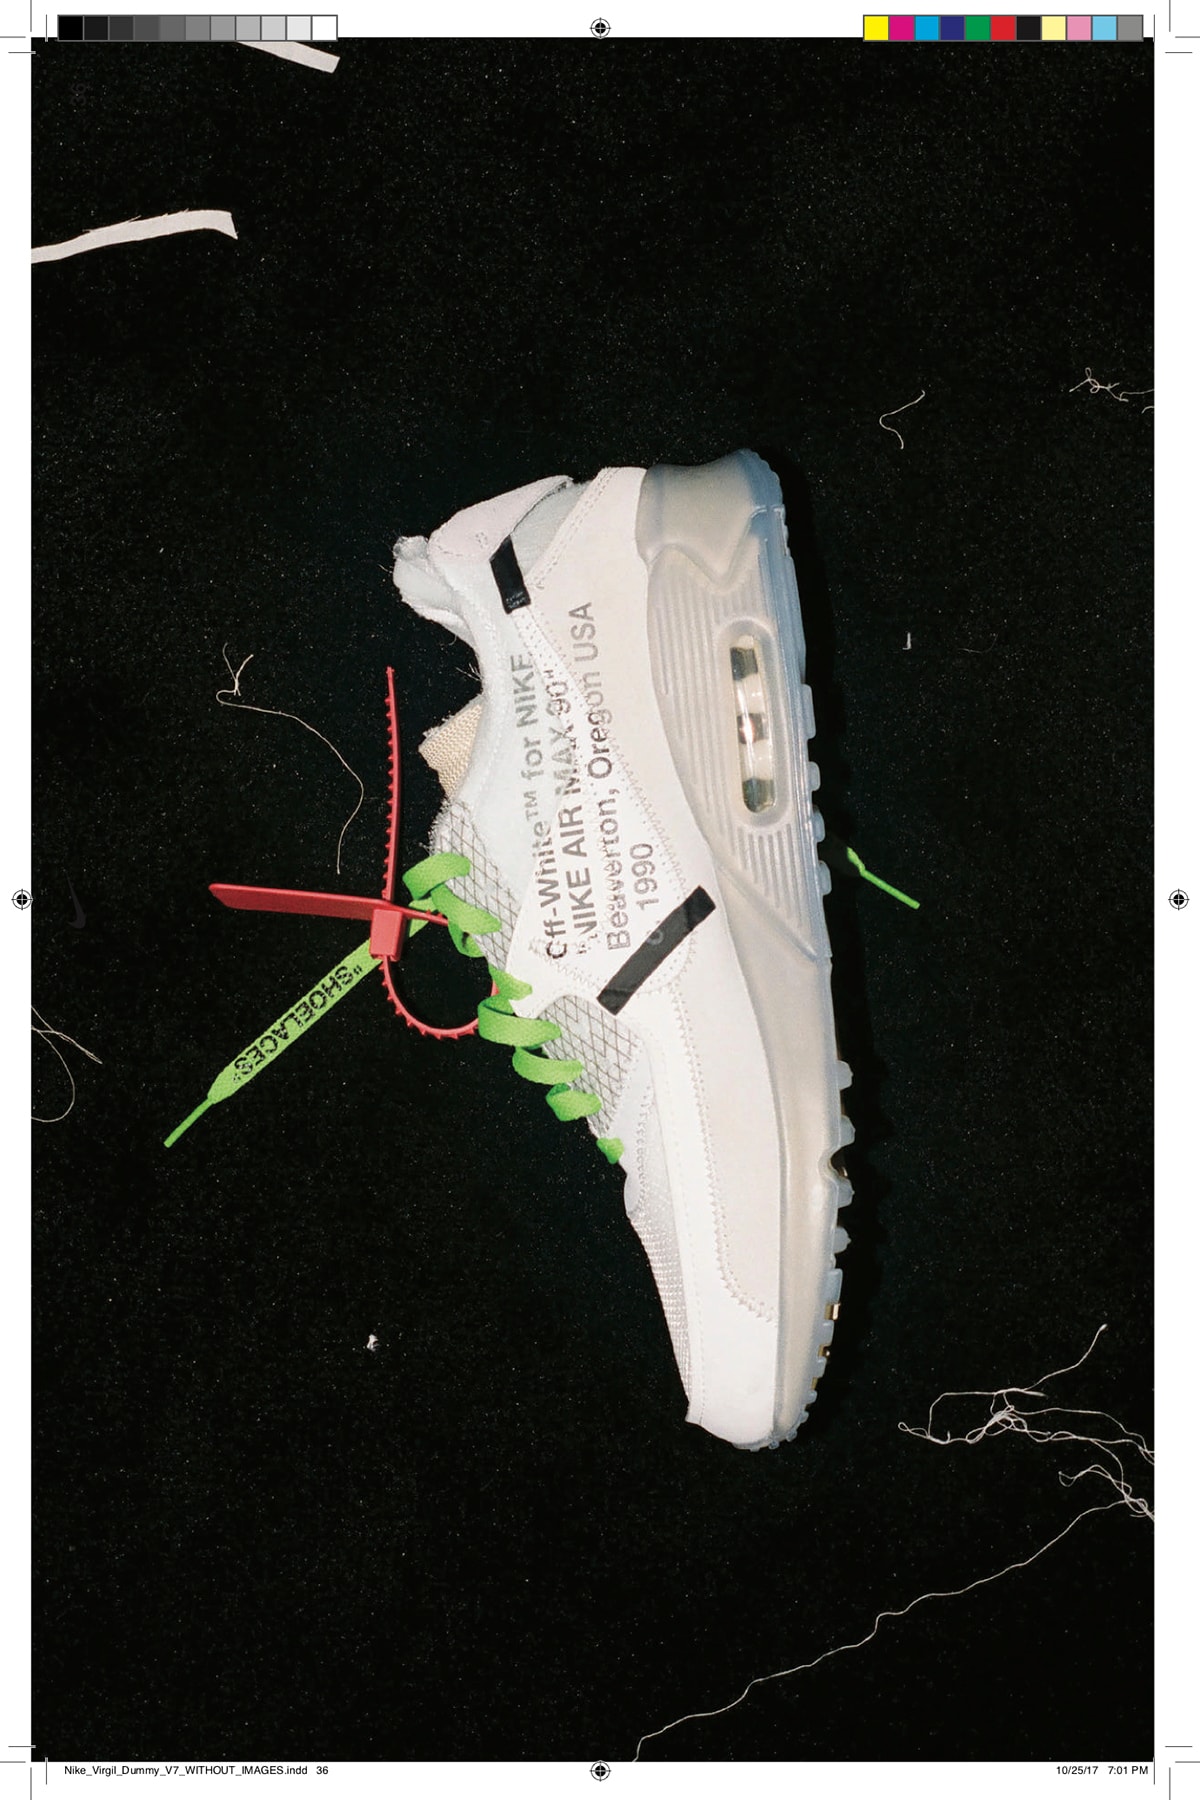 Virgil Abloh x Nike "TEXTBOOK" Download Available Link The Ten Reconstructed